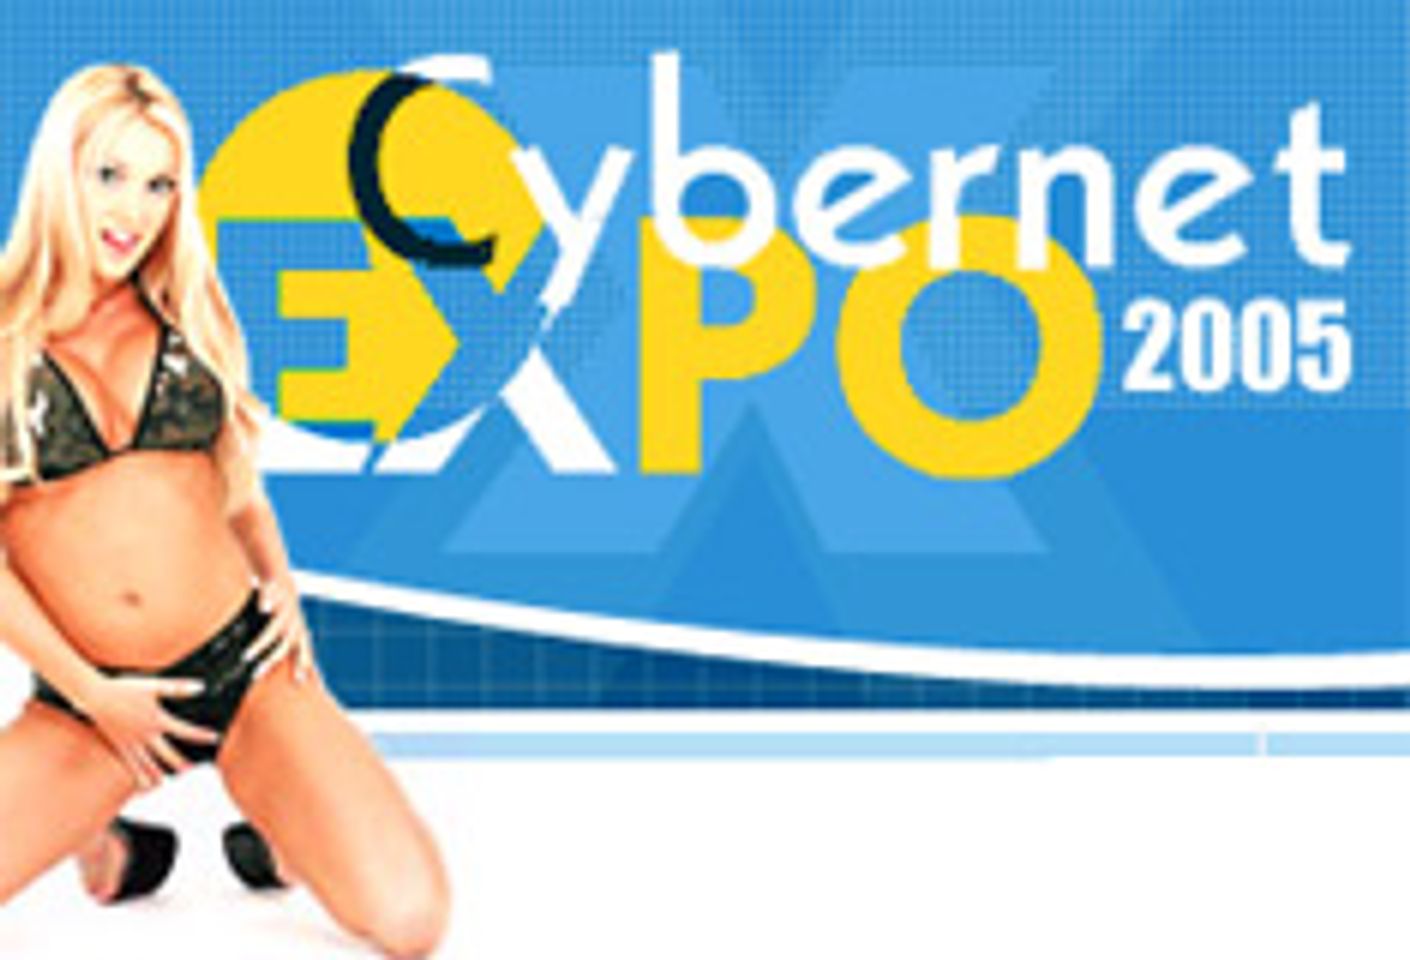 Cybernet Expo 2005 Party List Announced